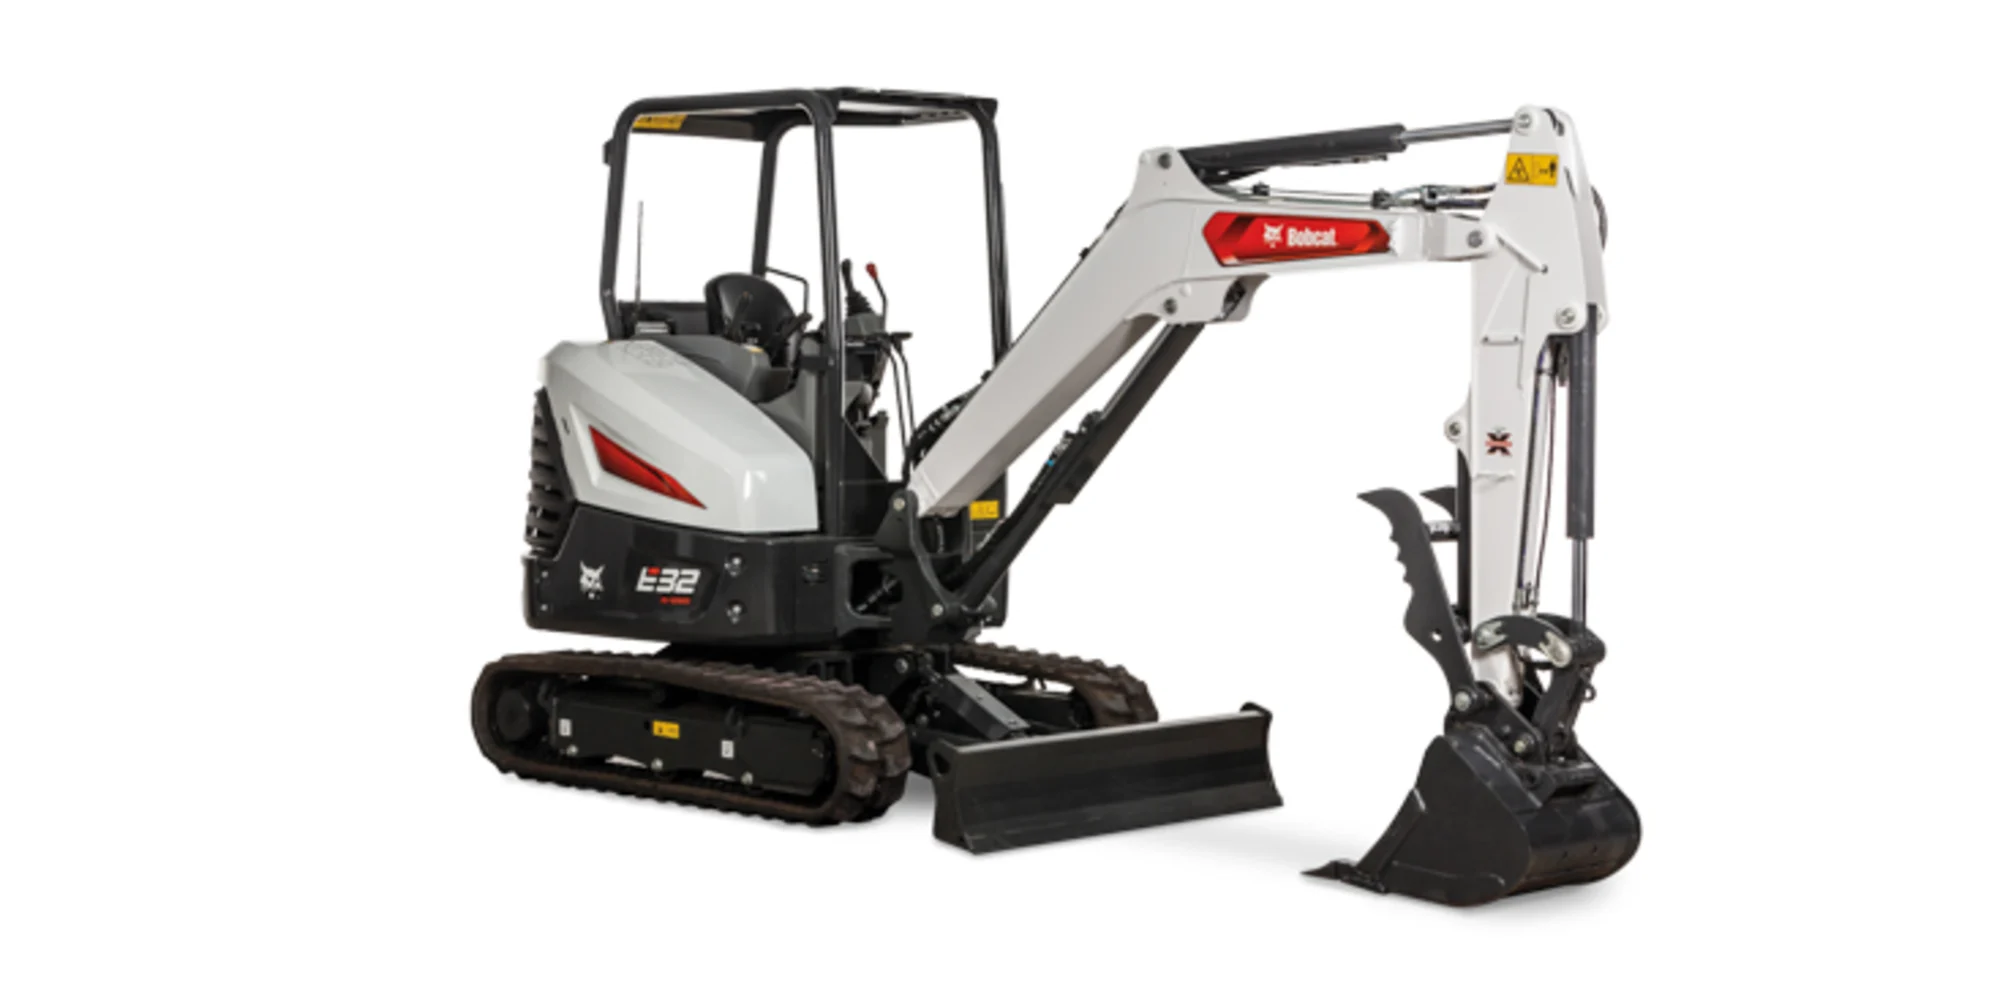 Browse Specs and more for the Bobcat E32 Compact Excavator - KC Bobcat